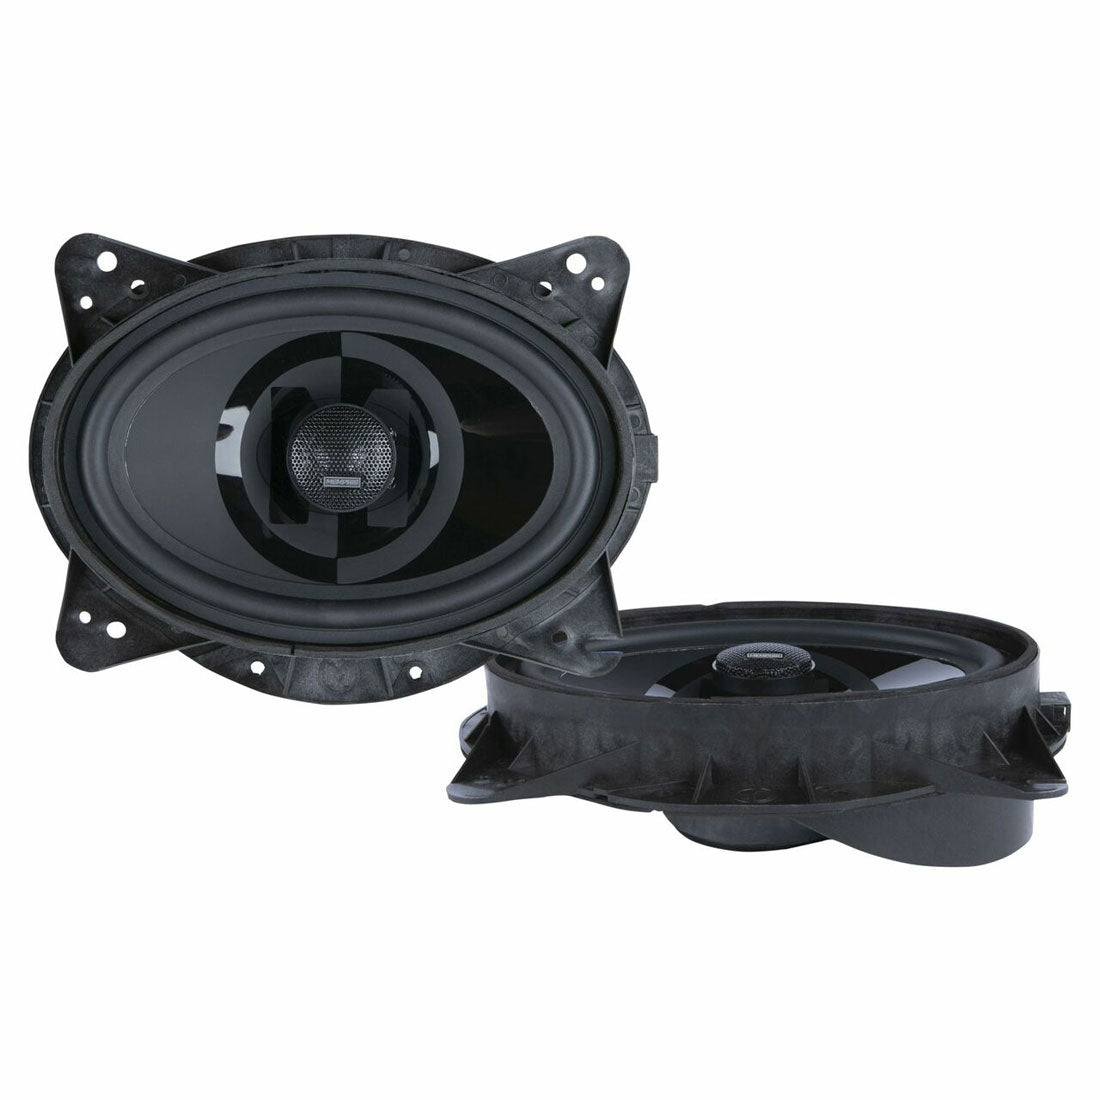 Memphis Audio PRXTY690 Power Reference 6"×9" 2-Way Coaxial Speakers – Toyota OEM fit